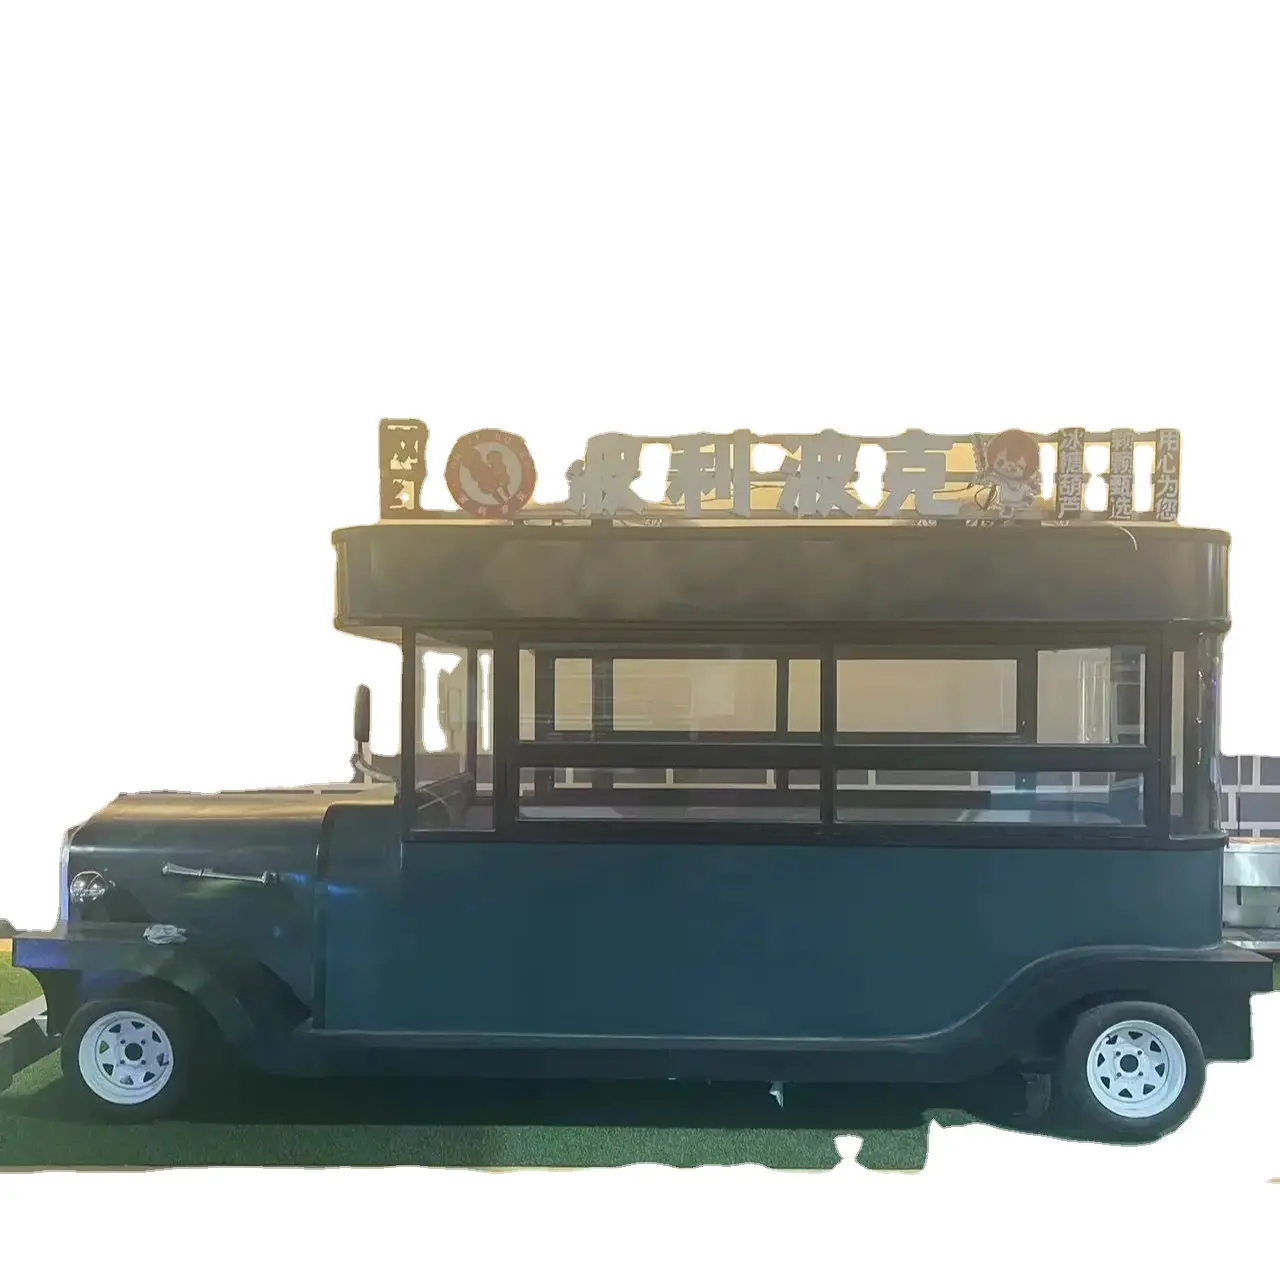 Bobang Mobile Coffee Burger Vans Electric Food Cart French Pastries Fast Food Bus Food Truck with Full Kitchen Equipment